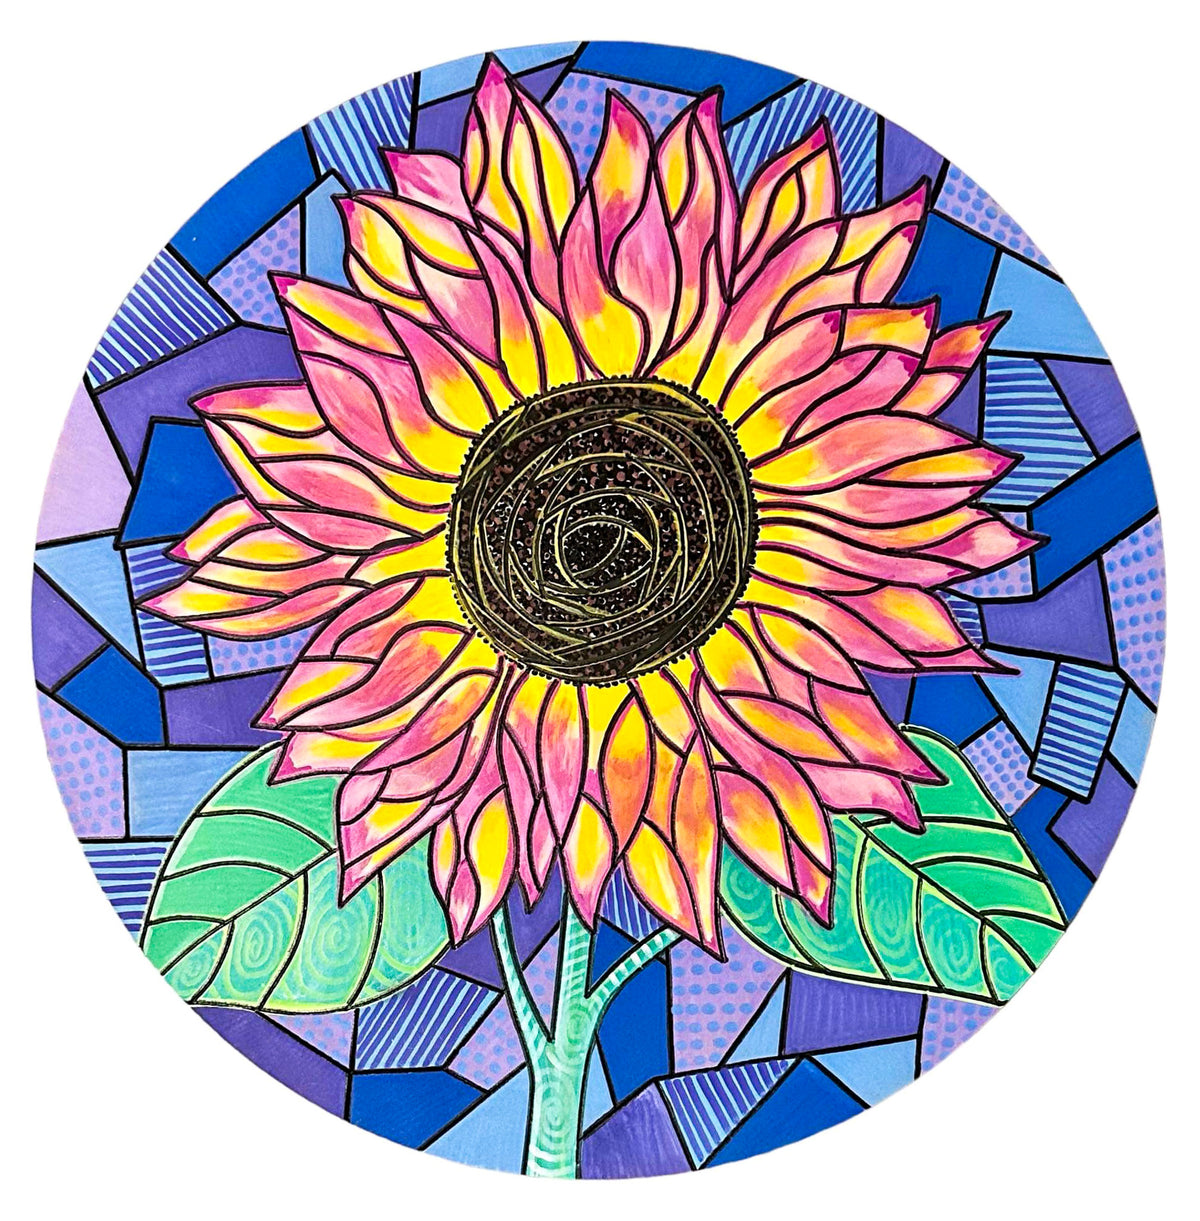 Life of Colour Mosaic Painting Kit - Sunflower with Acrylic markers